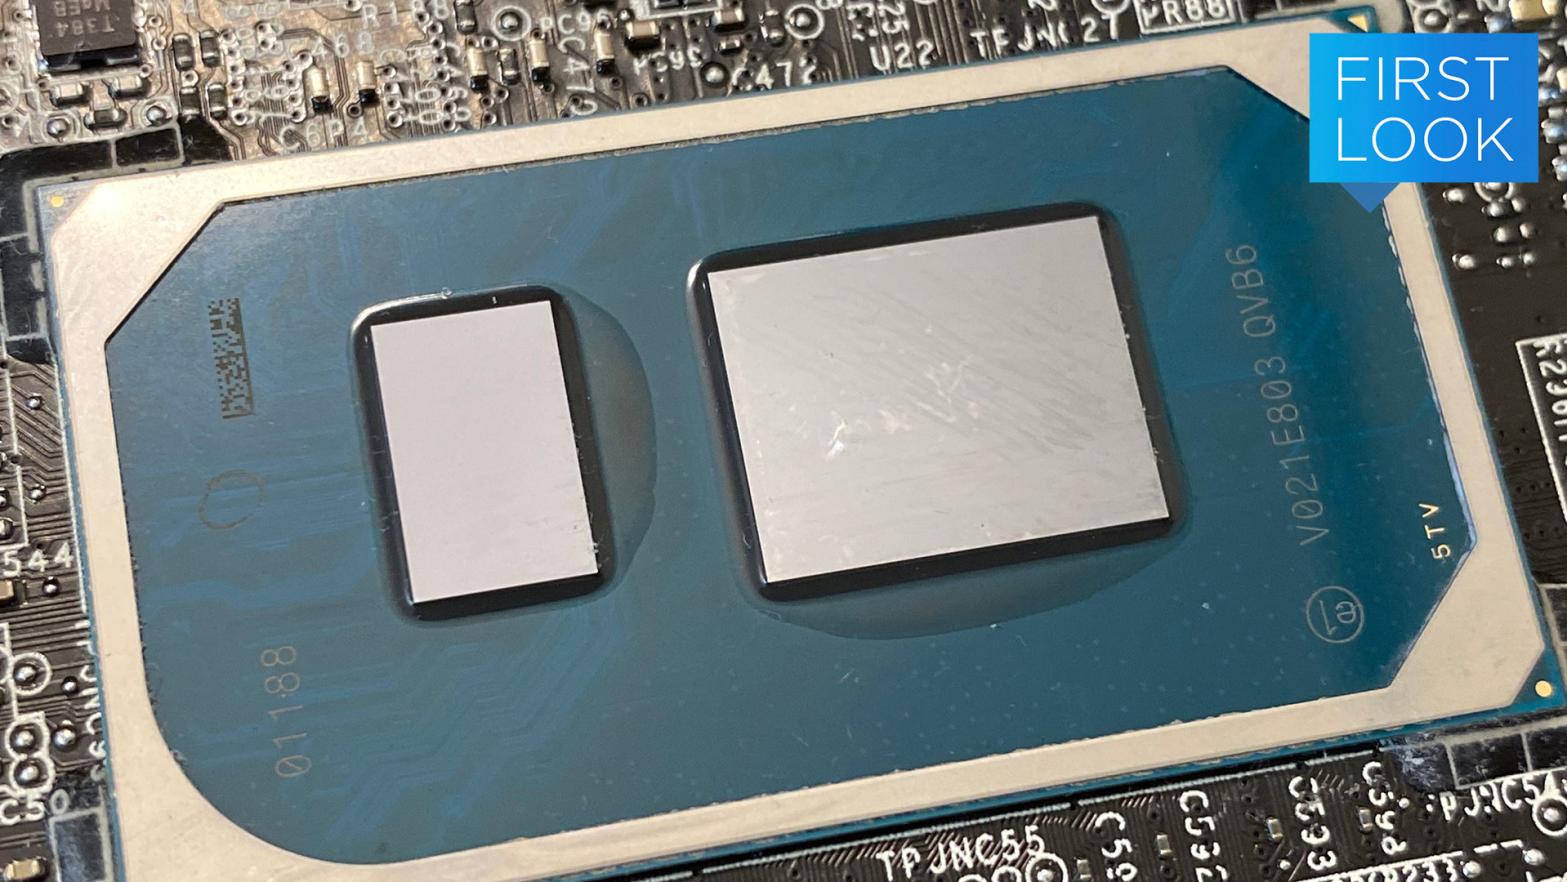 Intel's Tiger Lake processor as it appears in pre-production systems. (Photo: Intel)